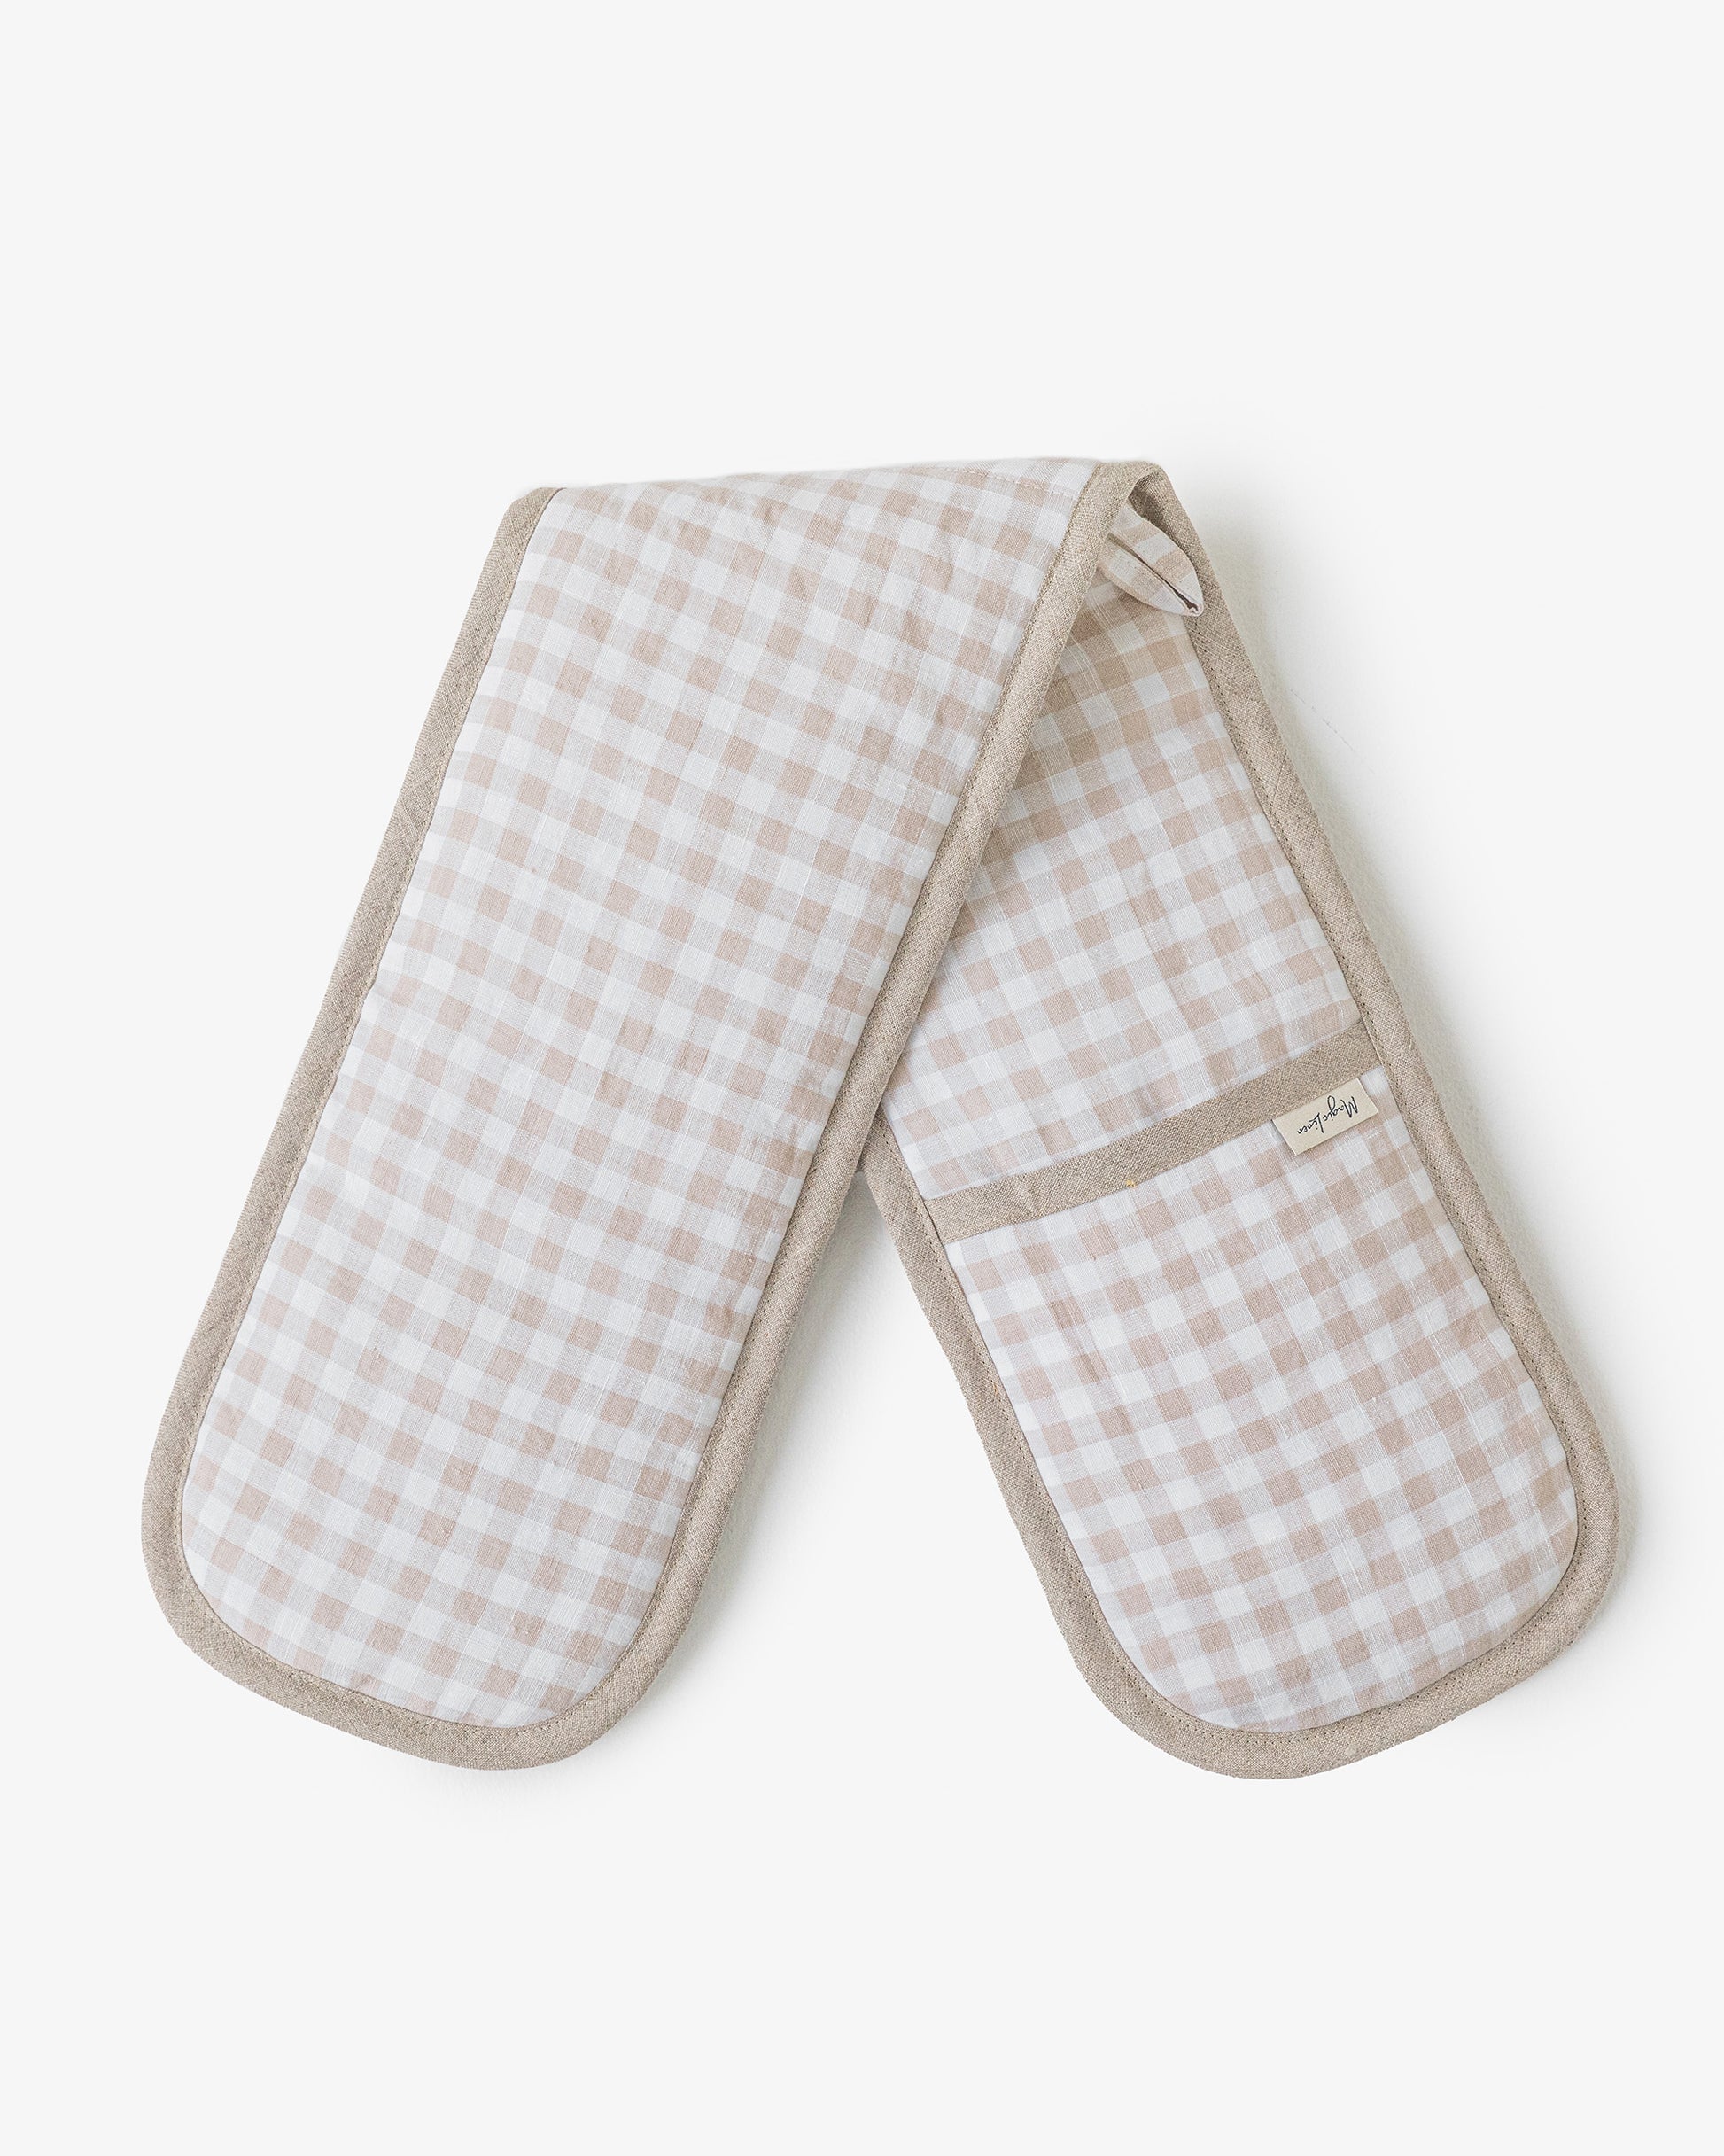 Double oven mitt (1 pcs) in Natural gingham - MagicLinen